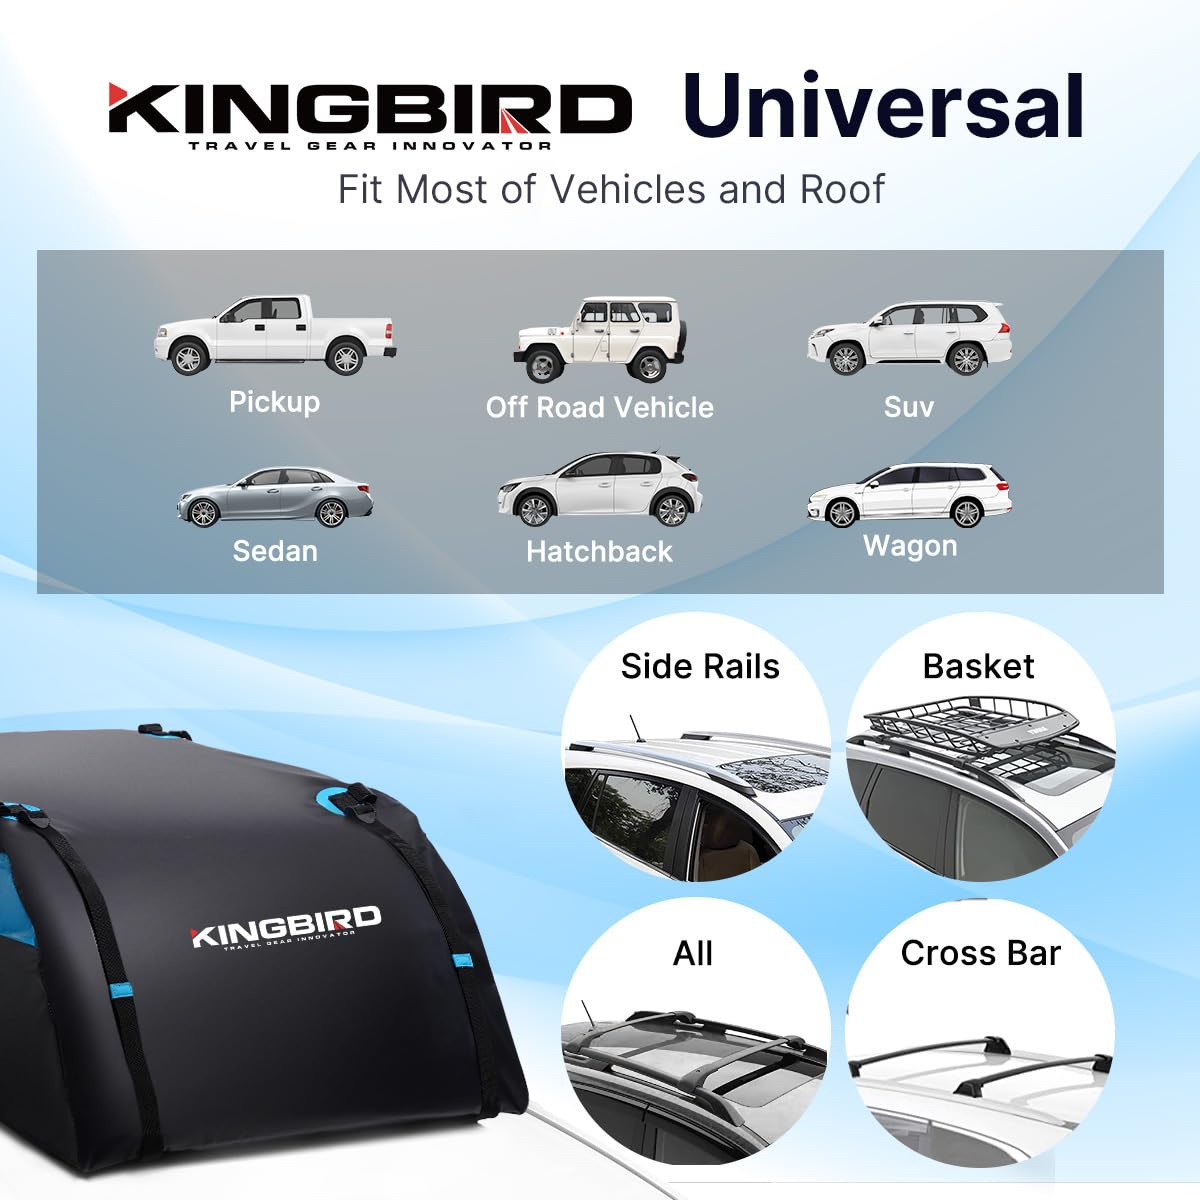 KING BIRD Aerodynamic Rooftop Cargo Carrier Bag, 20 Cubic Feet Car Waterproof Roof Bag for All Vehicles with/Without Rack, Includes Anti-Slip Mat, 8 Reinforced Straps, 4 Door Hooks, Luggage Lock